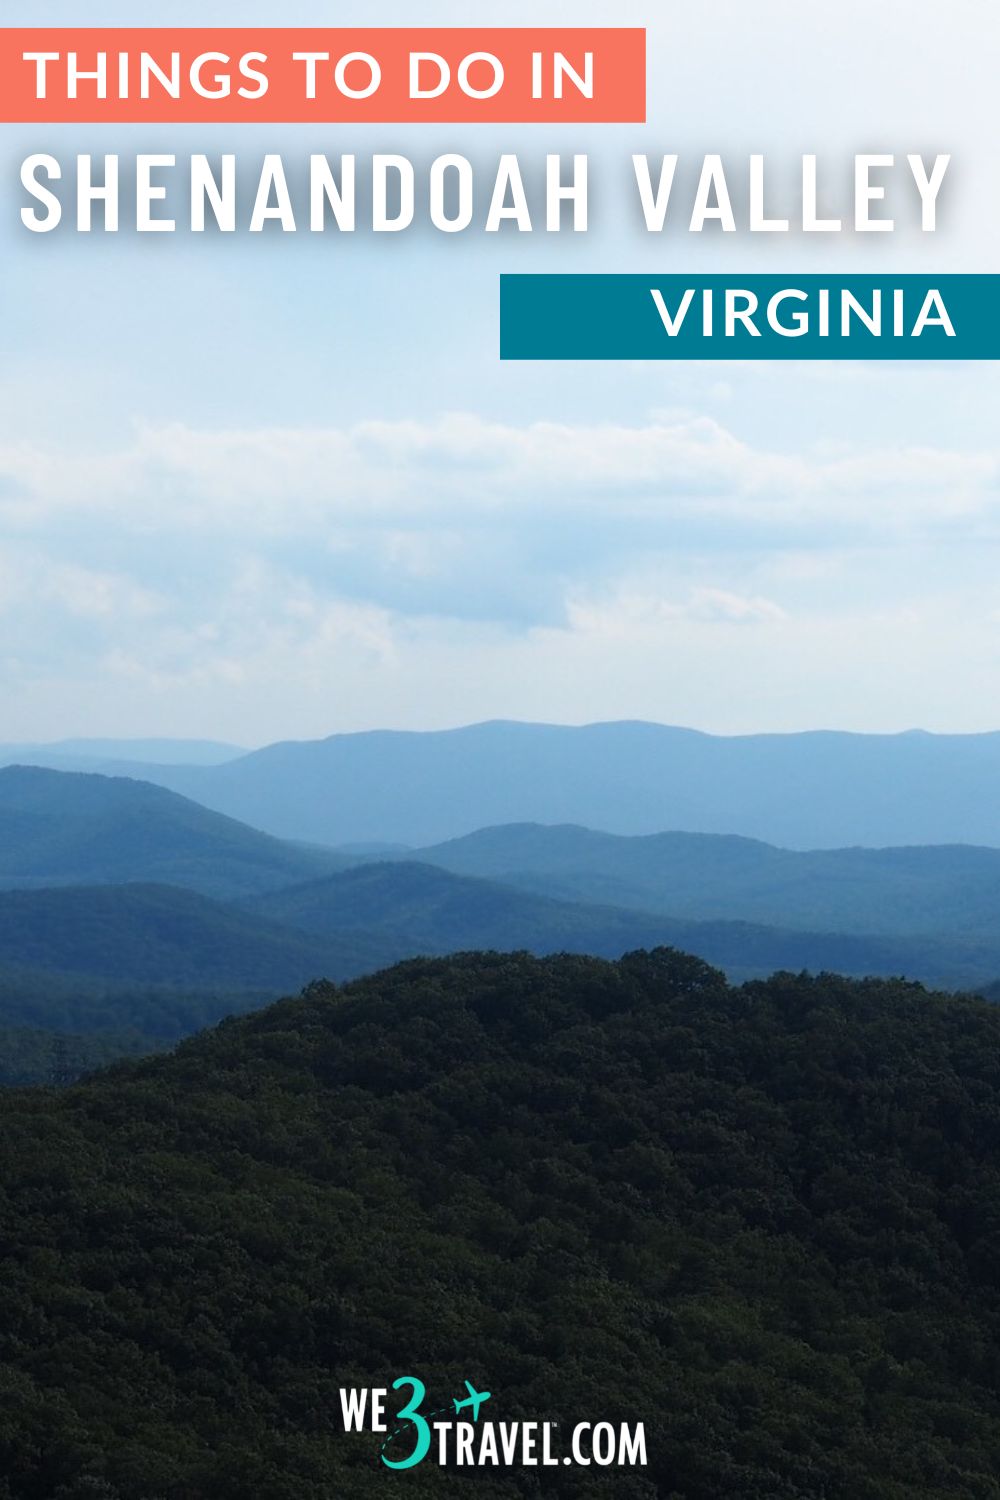 Planning to visit Shenandoah National Park and the Shenandoah Valley this year? Find out fun things to do in Shenandoah Valley Virginia beyond the Skyline Drive and Blue Ridge Parkway scenic drives.